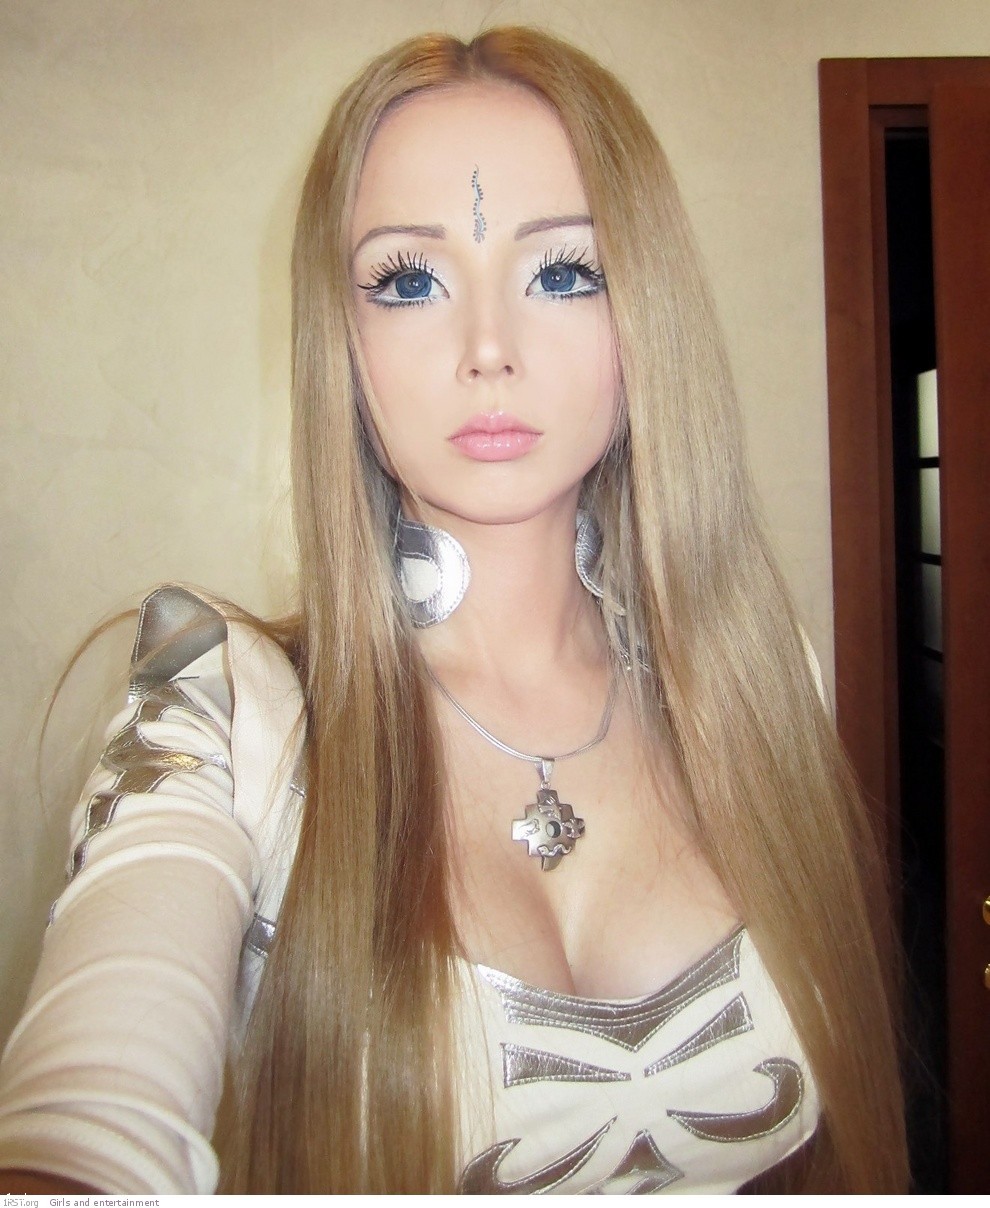 Another photos of barbie girl from russia